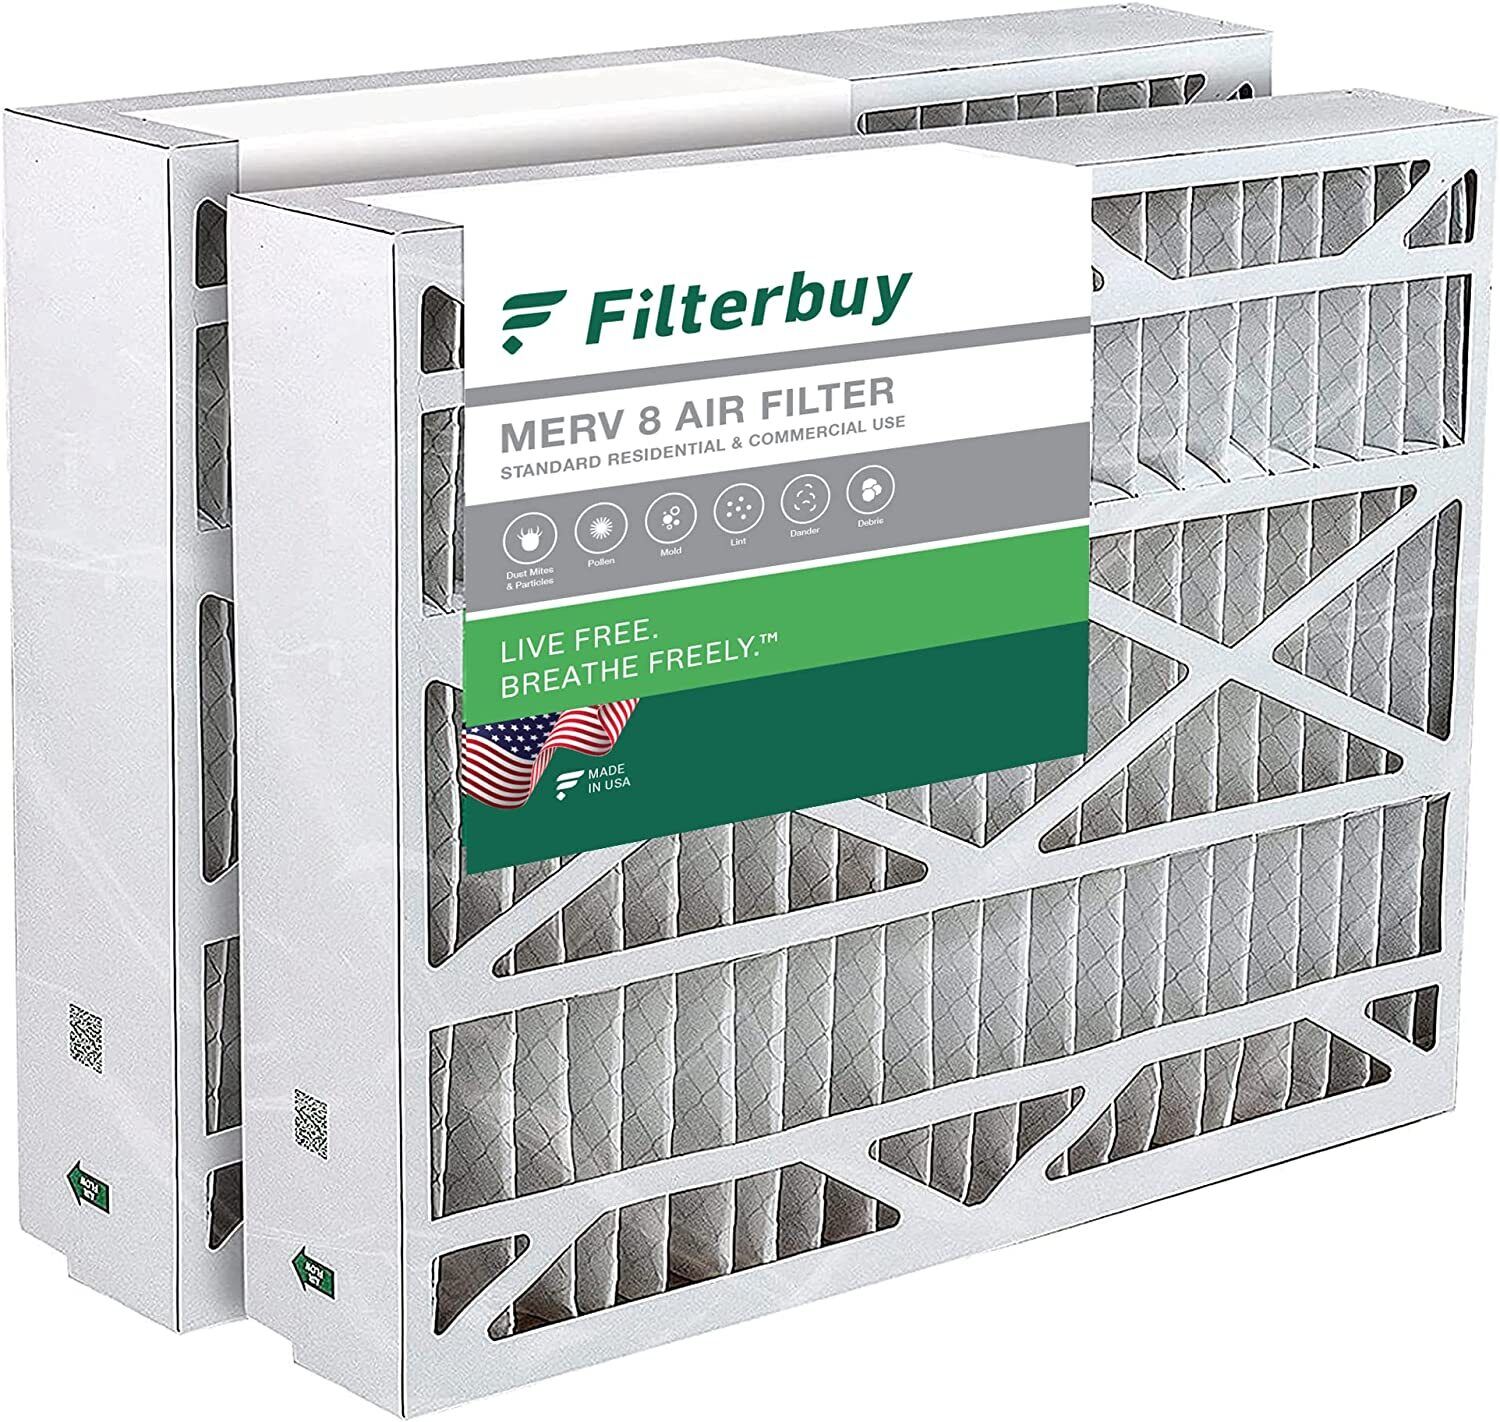 Filterbuy 24x25x5 Air Filters MERV 8, Pleated AC Furnace Replacement for Carrier